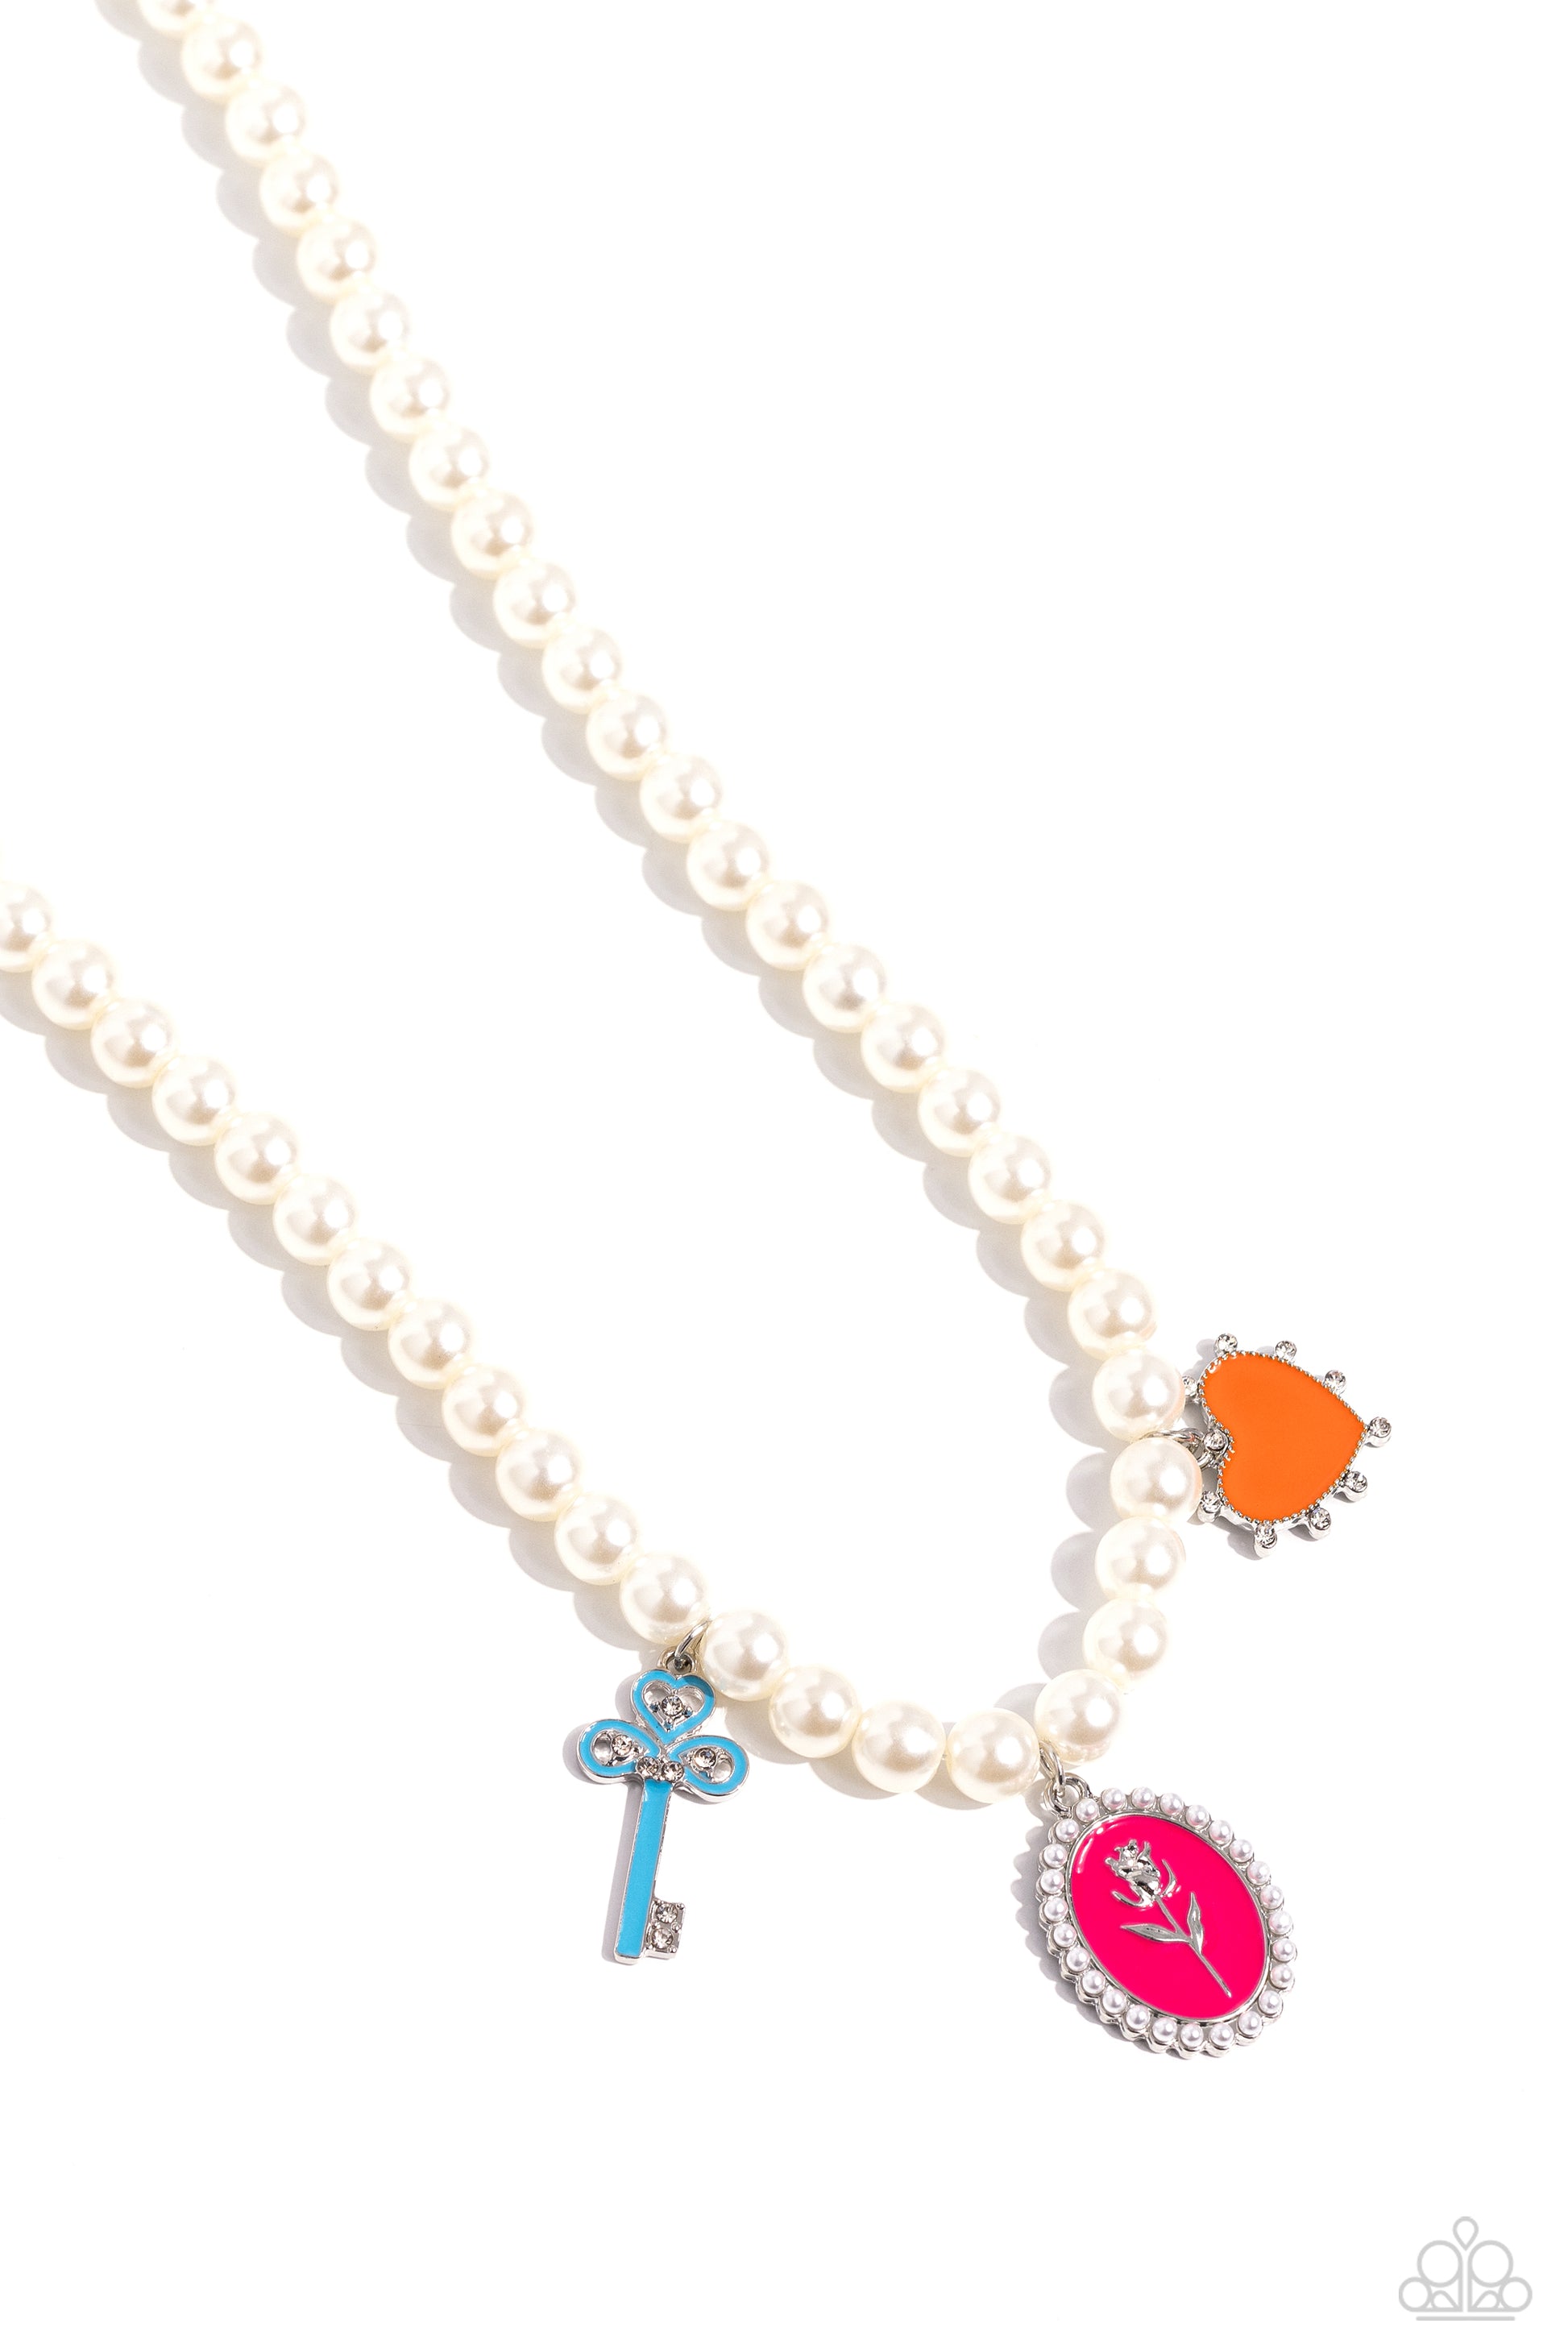 Charming Collision Multi Pearl Charm Necklace - Paparazzi Accessories  Infused along an invisible string, a collection of gleaming white pearls coalesces below the collar for a refined display. Featuring white rhinestones and dainty pearl accents, three Pink Peacock, orange, and blue painted charms, including a key, rose pendant, and studded heart, dangle below the pearly display for a girly pop of color. Features an adjustable clasp closure.